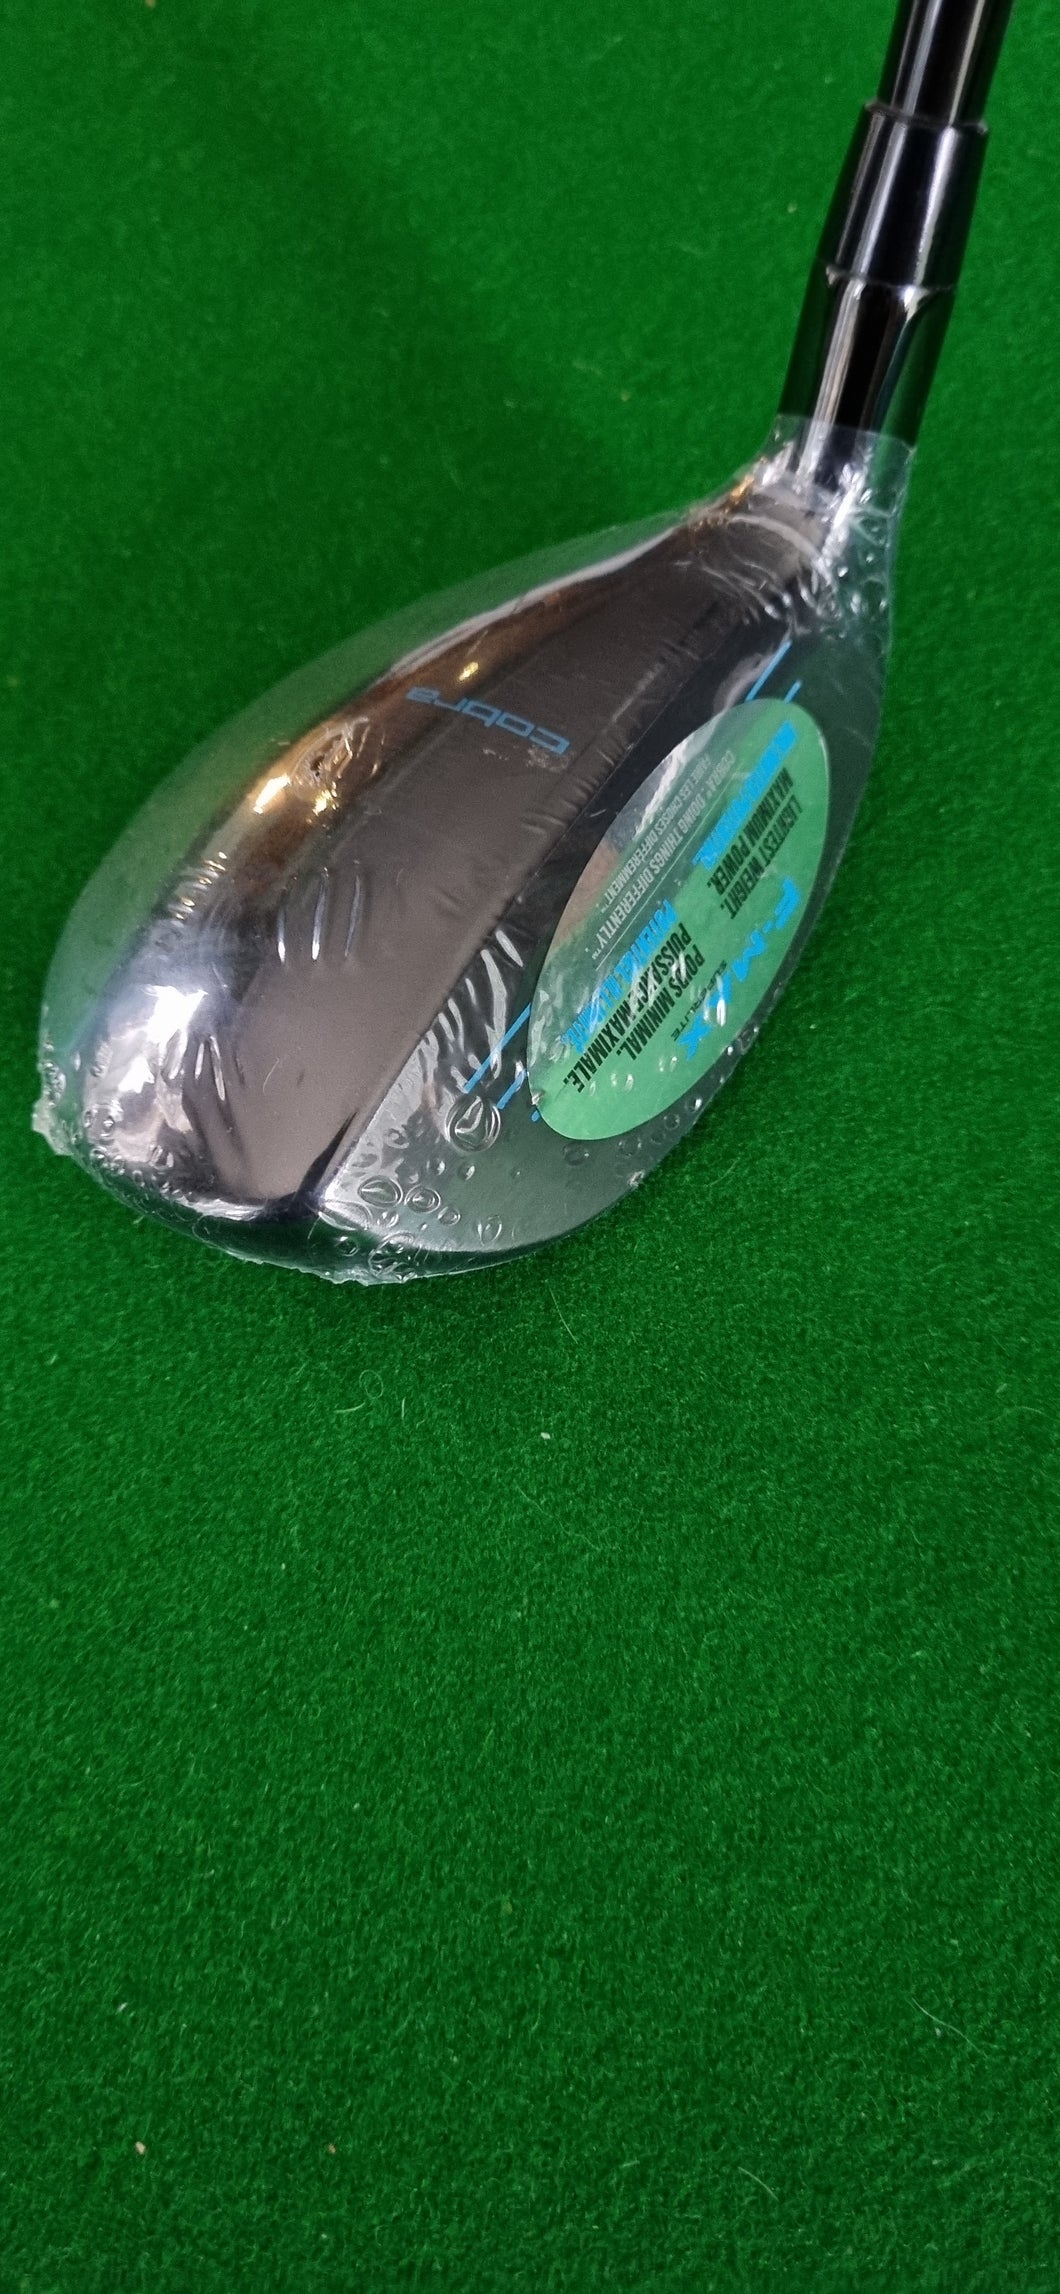 New Cobra F-MAX Ladies 7 Hybrid with Cover